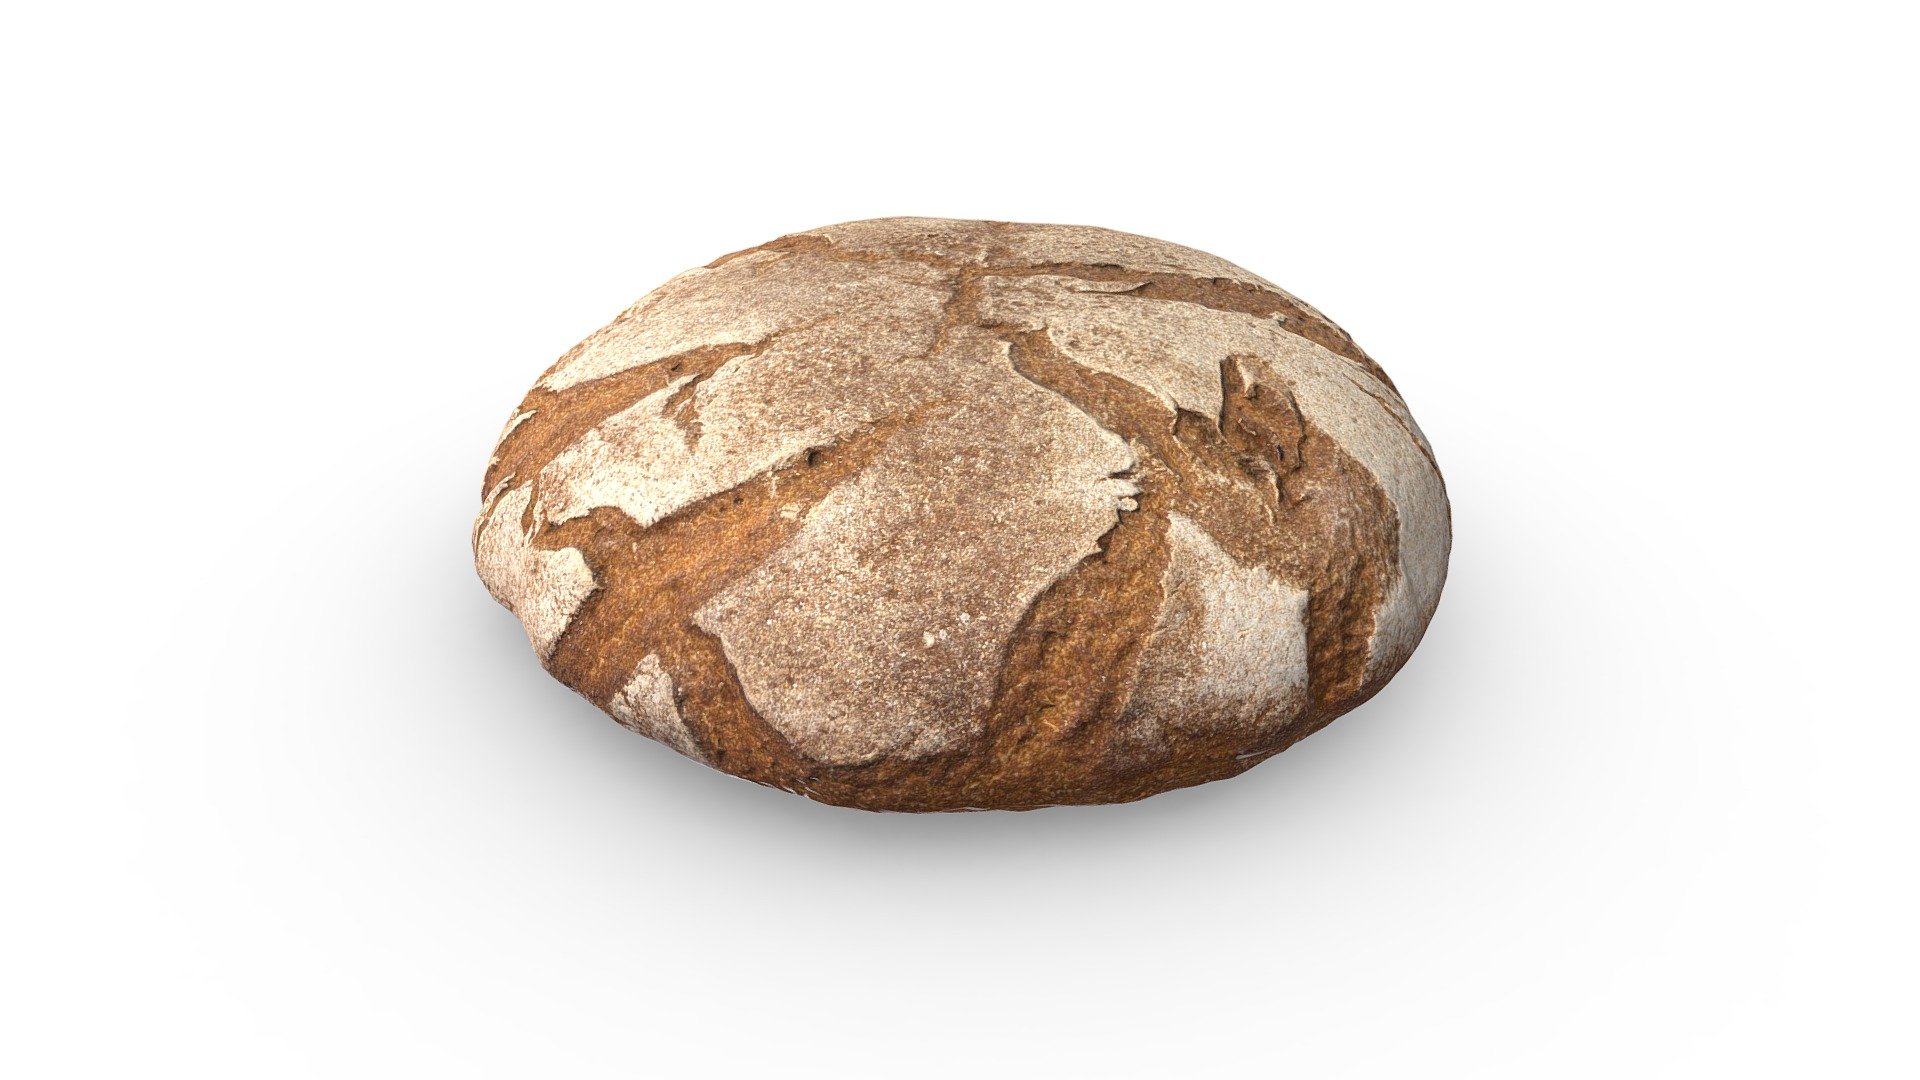 High-poly loaf of rye bread photogrammetry scan. PBR texture maps 4096x4096 px. resolution for metallic or specular workflow. Scan from real food, high-poly 3D model, 4K resolution textures. Additional file contains source PNG texture maps.

Additional texture maps: AmbientOcclusion, BaseColor, Diffuse, Glossiness, Height, Metallic, MetallicSmoothness, Normal, Roughness, Specular, SpecularLevel, SpecularSmoothness 3d model